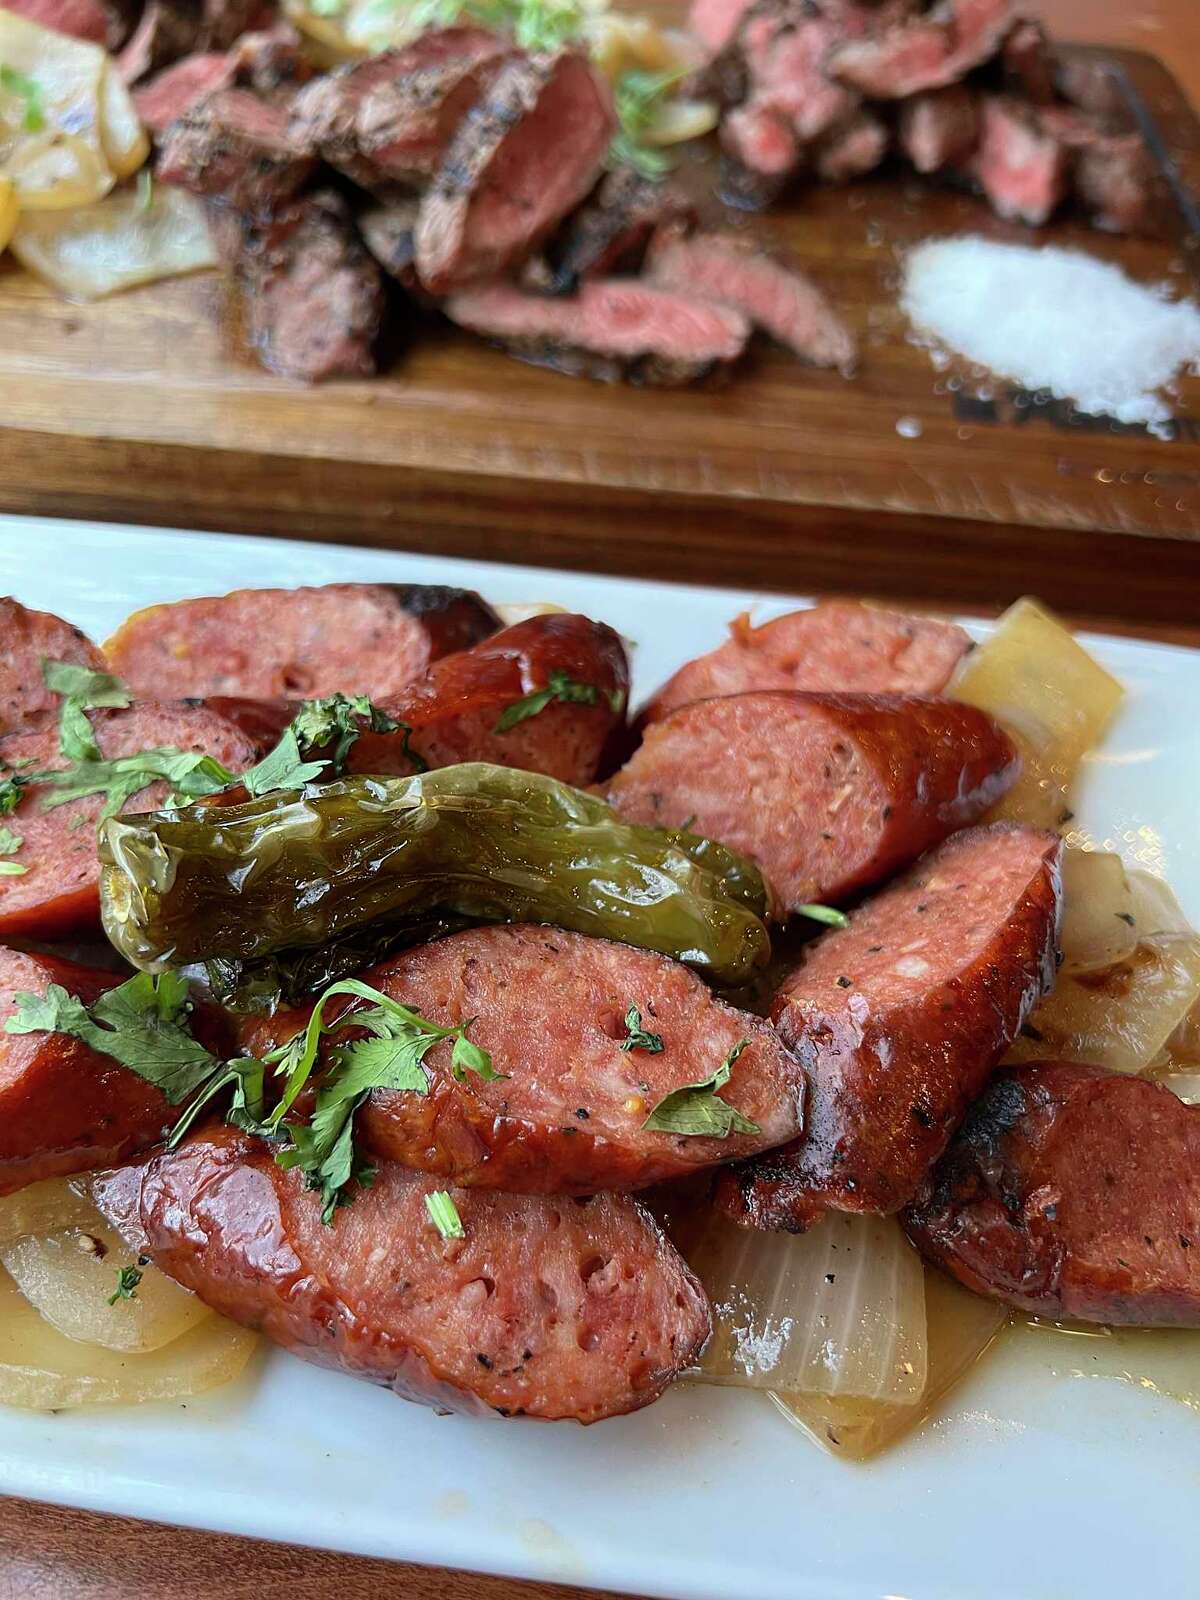 Wagyu sausage is grilled and served with grilled onions at Tu Asador, a Mexican-style steakhouse in Castle Hills.